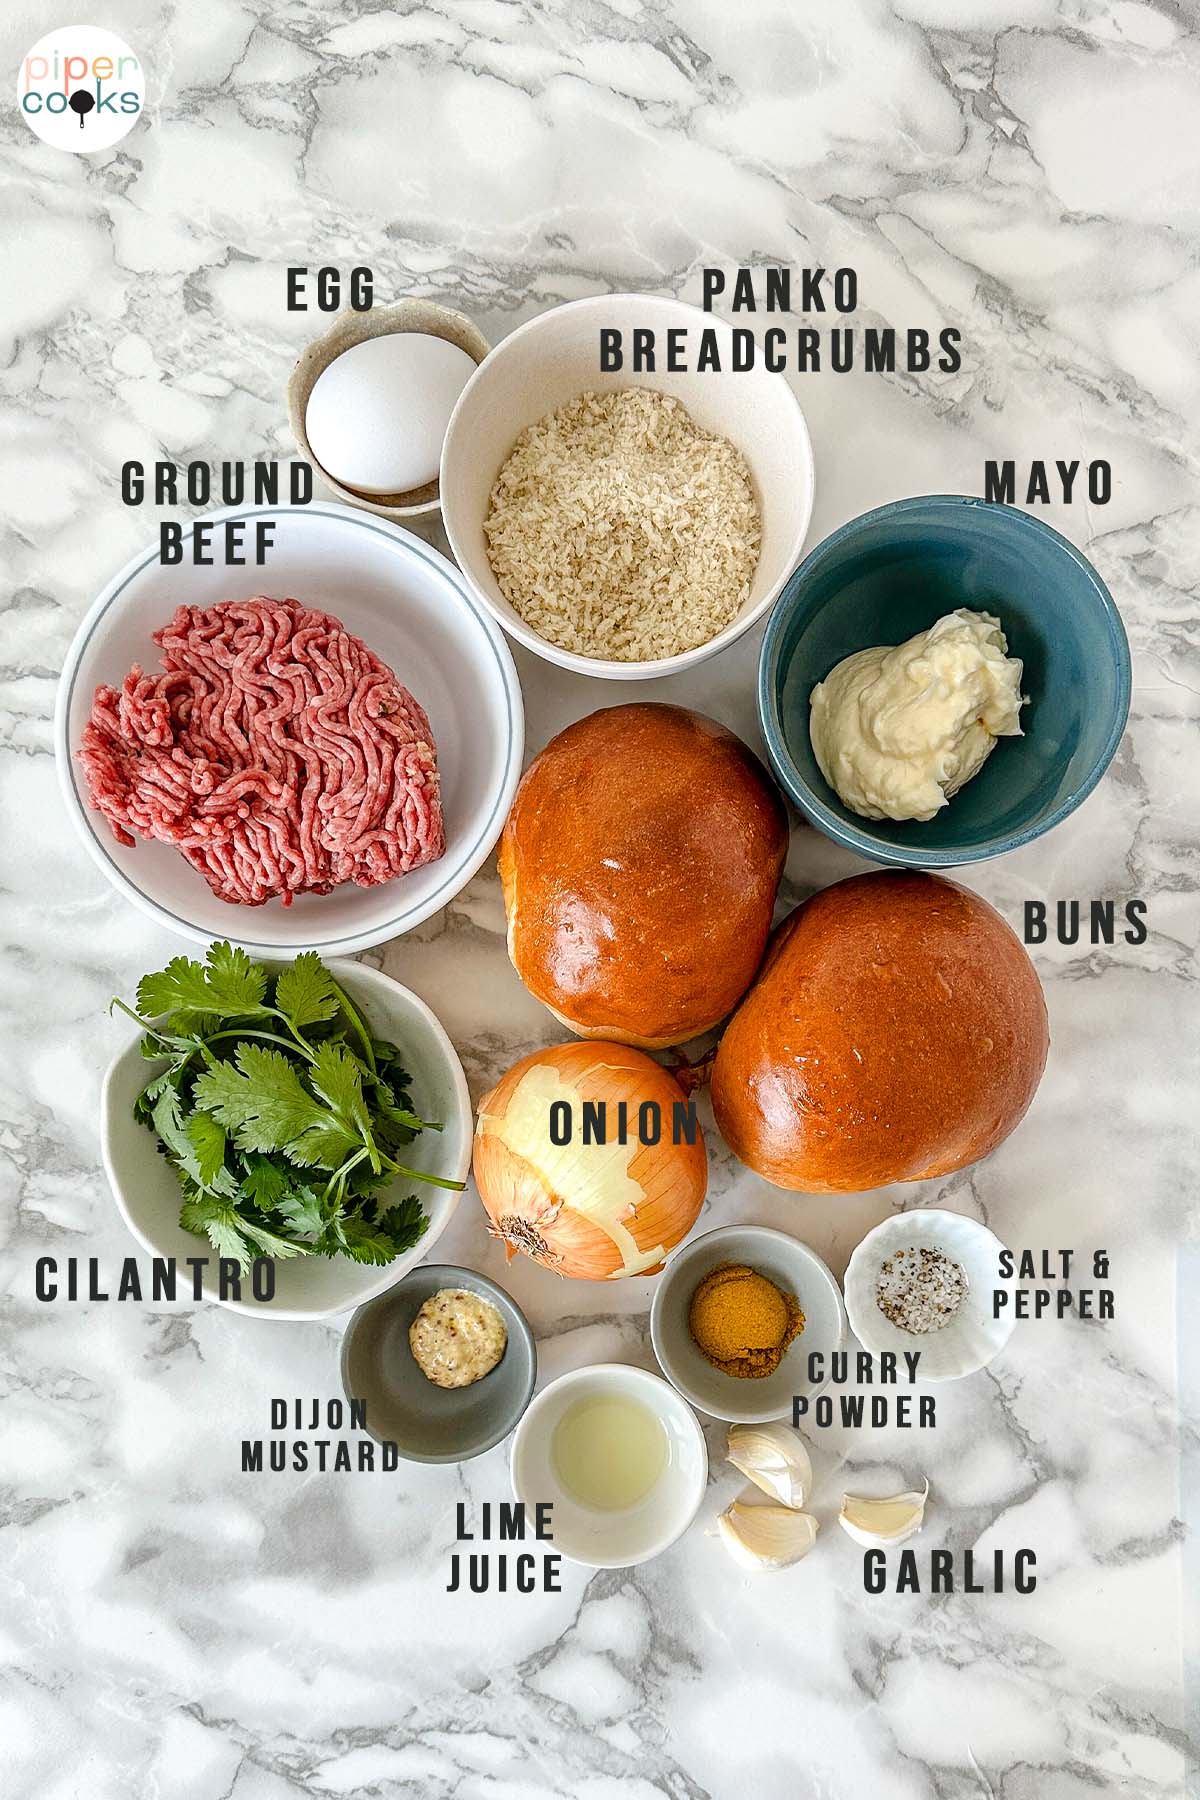 Ingredients for curry burgers, labeled egg, panko breadcrumbs, ground beef, mayo, buns, onion, cilantro, Dijon mustard, lime juice, curry powder, garlic, salt, and pepper.